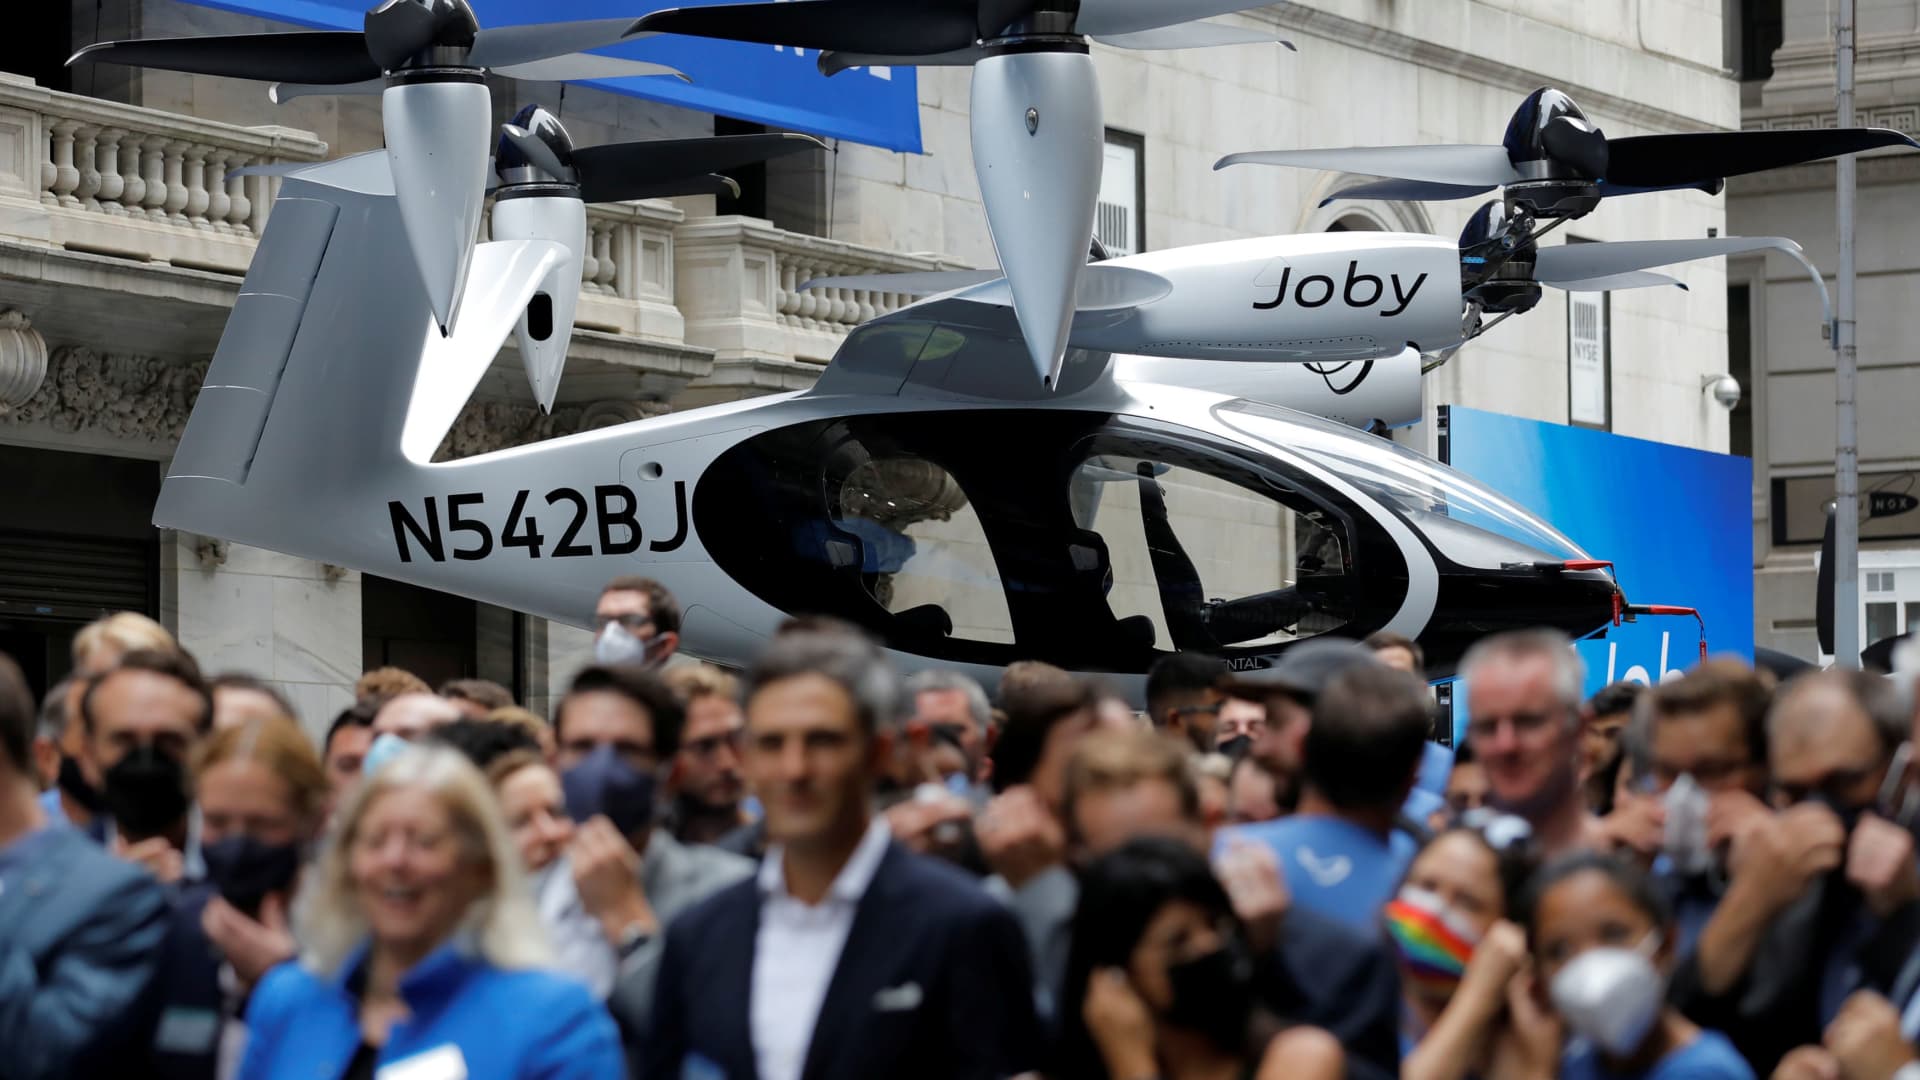 Joby Aviation can’t hit production targets on time, according to short sellers' report - CNBC